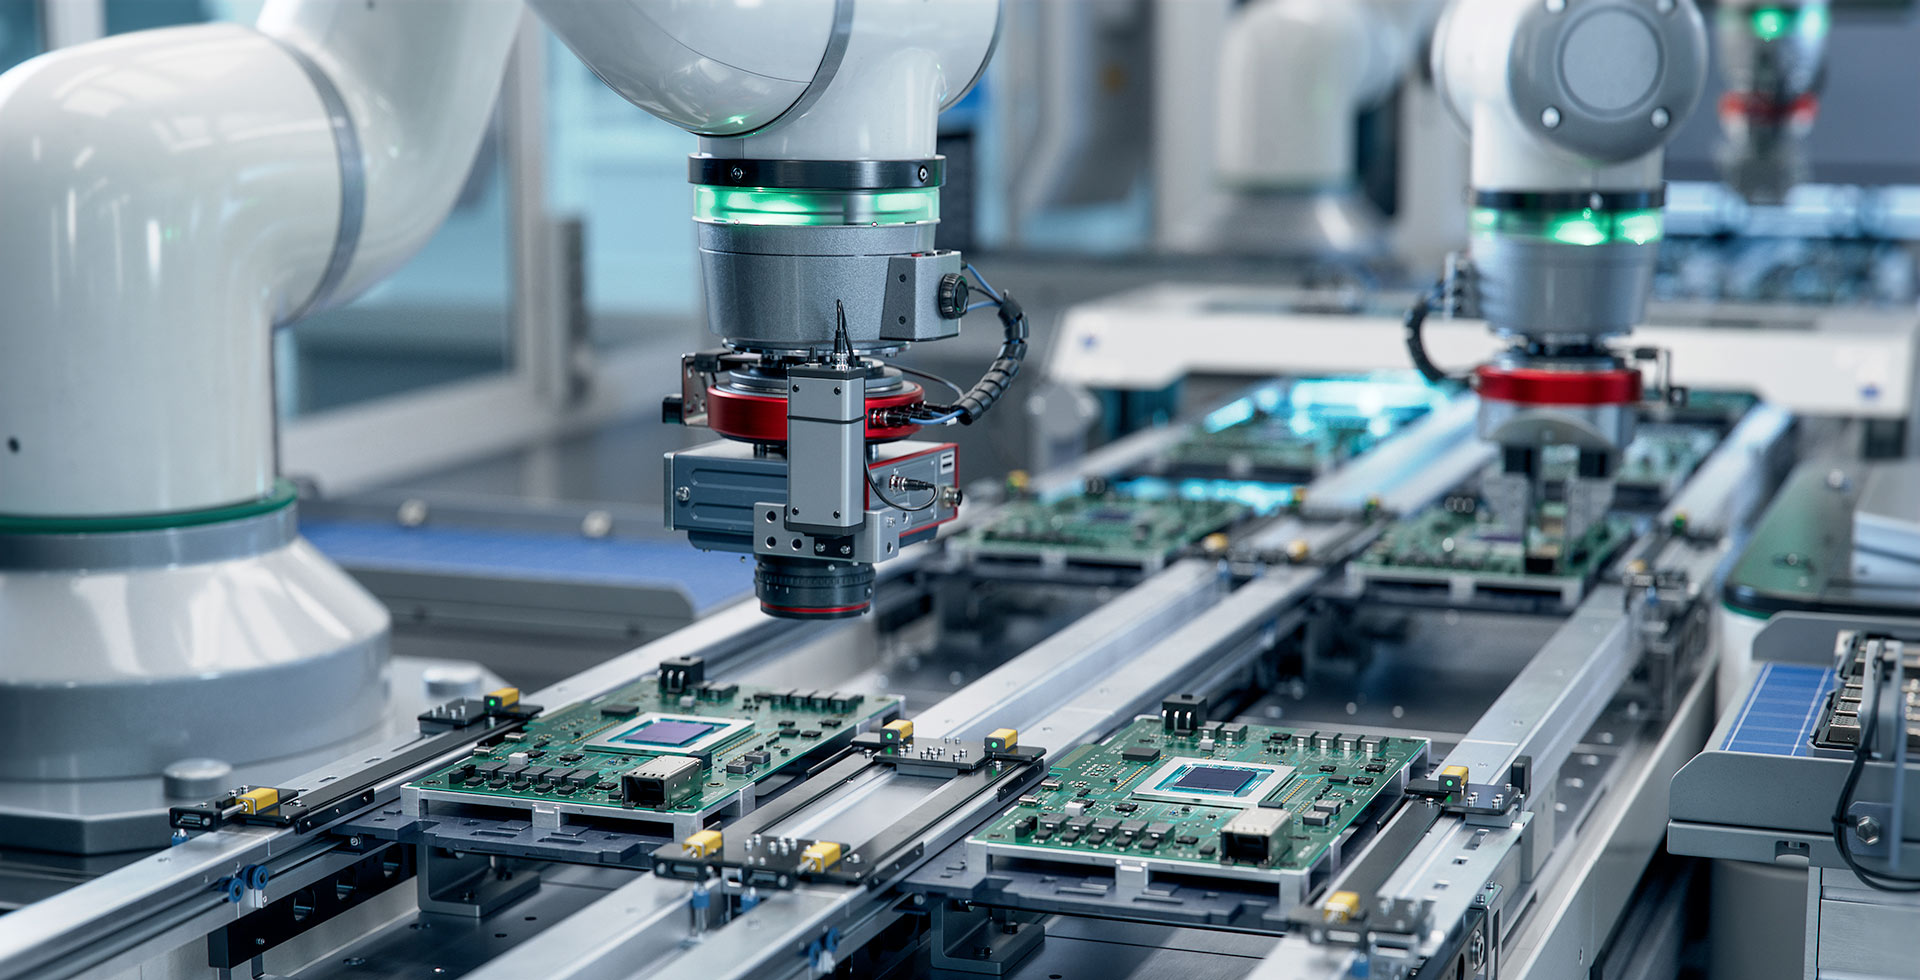 image of a Component Installation and Quality Control of Circuit Board. Fully Automated PCB Assembly Line Equipped with High Precision Robot Arms at Electronics Factory. Electronic Devices Manufacturing Industry.